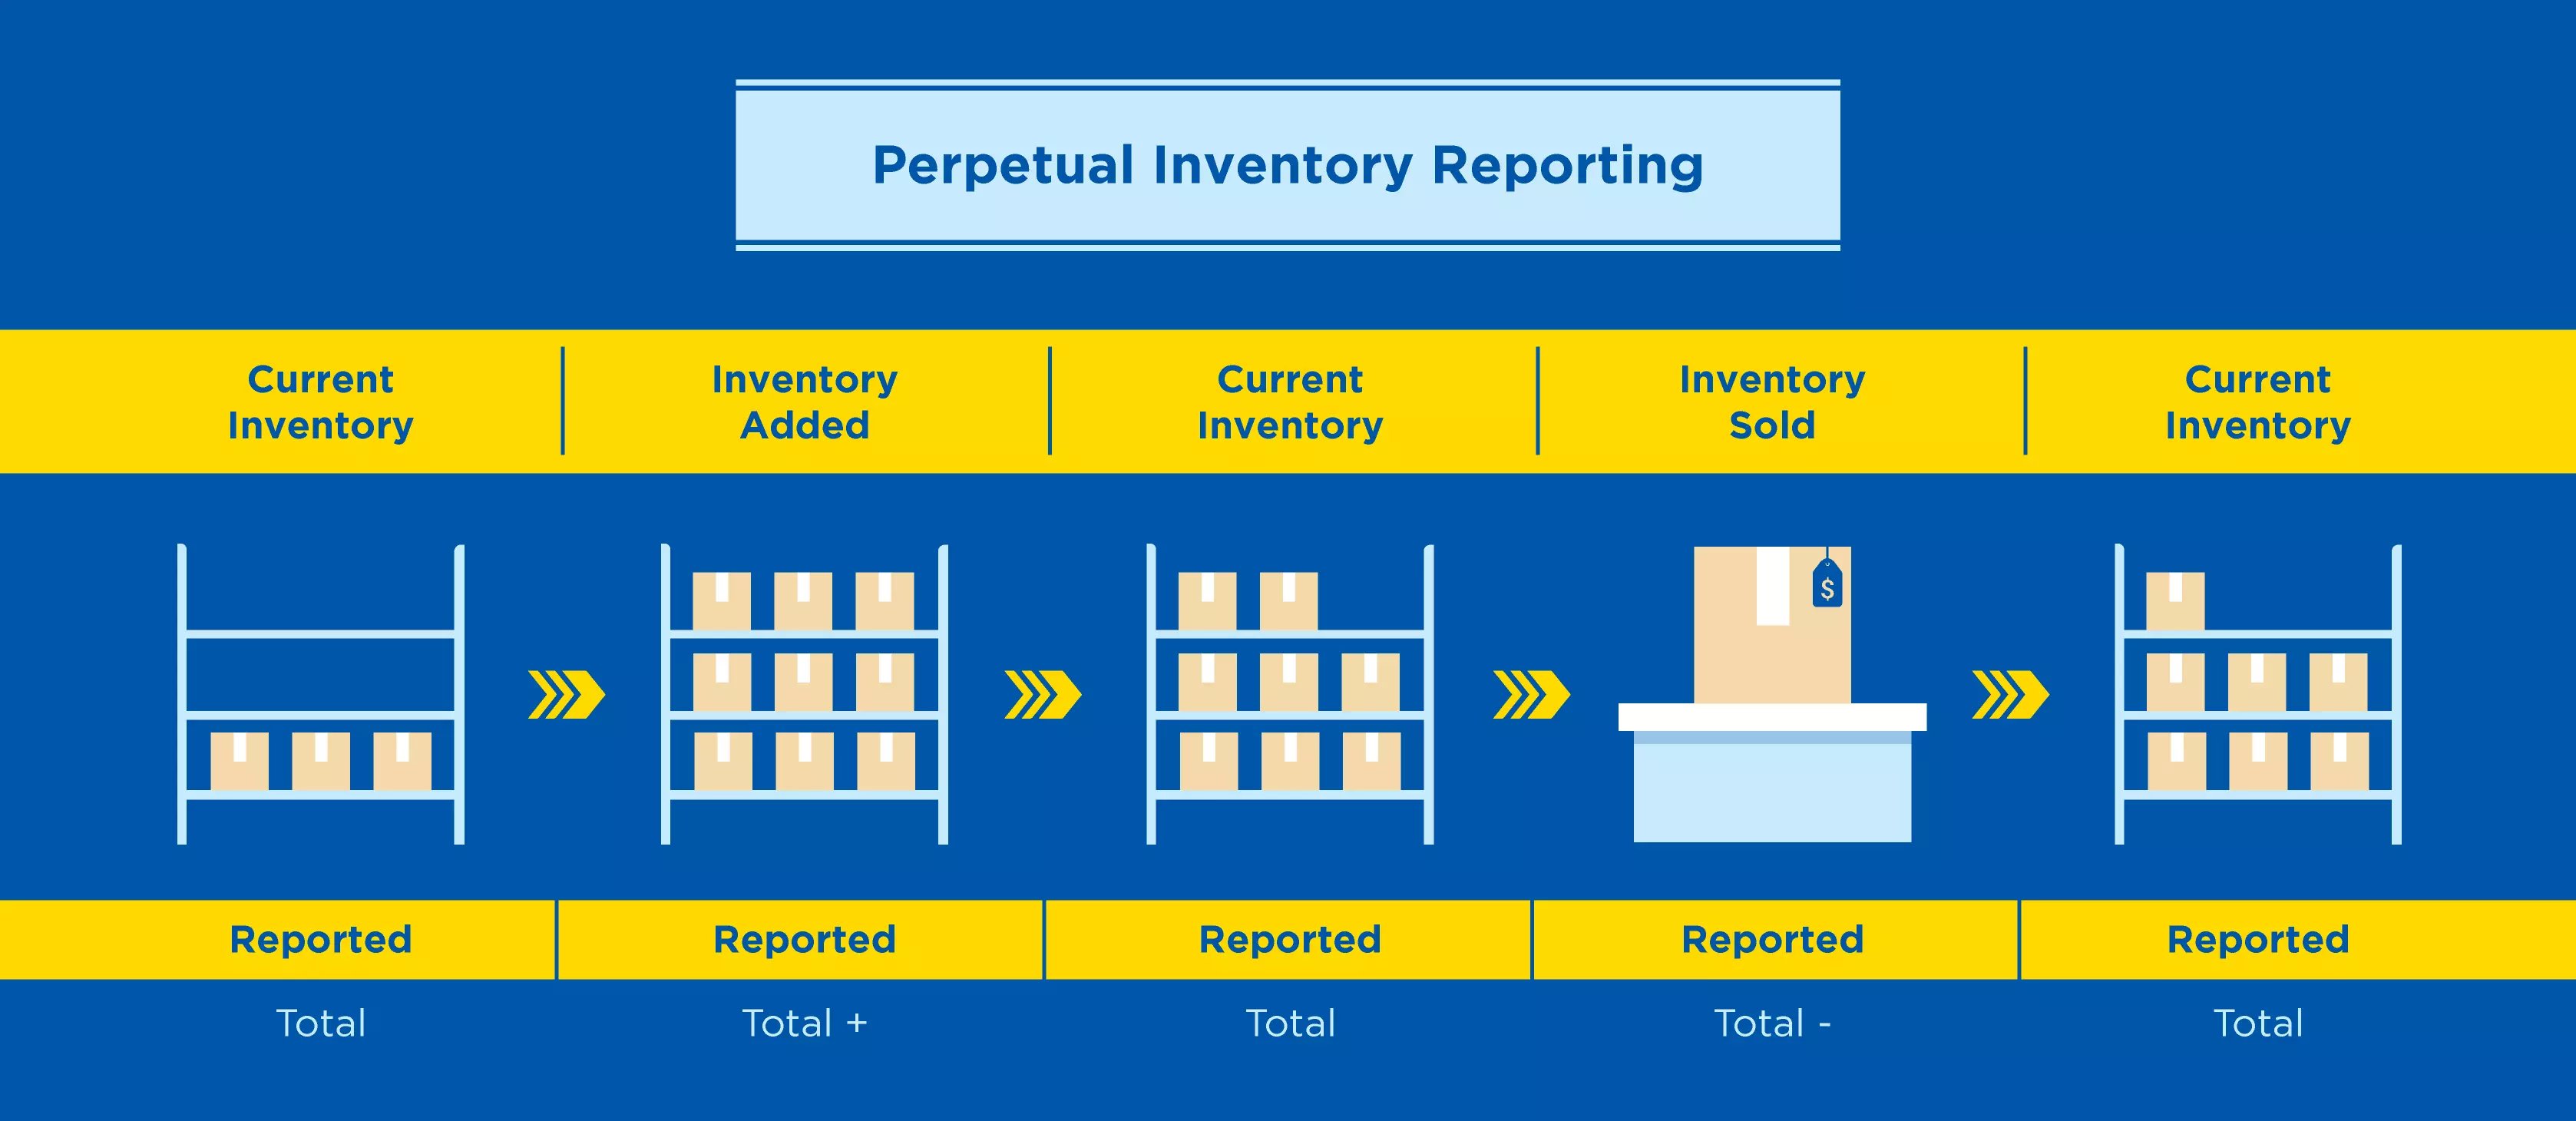 Perpetual Inventory Management Systems